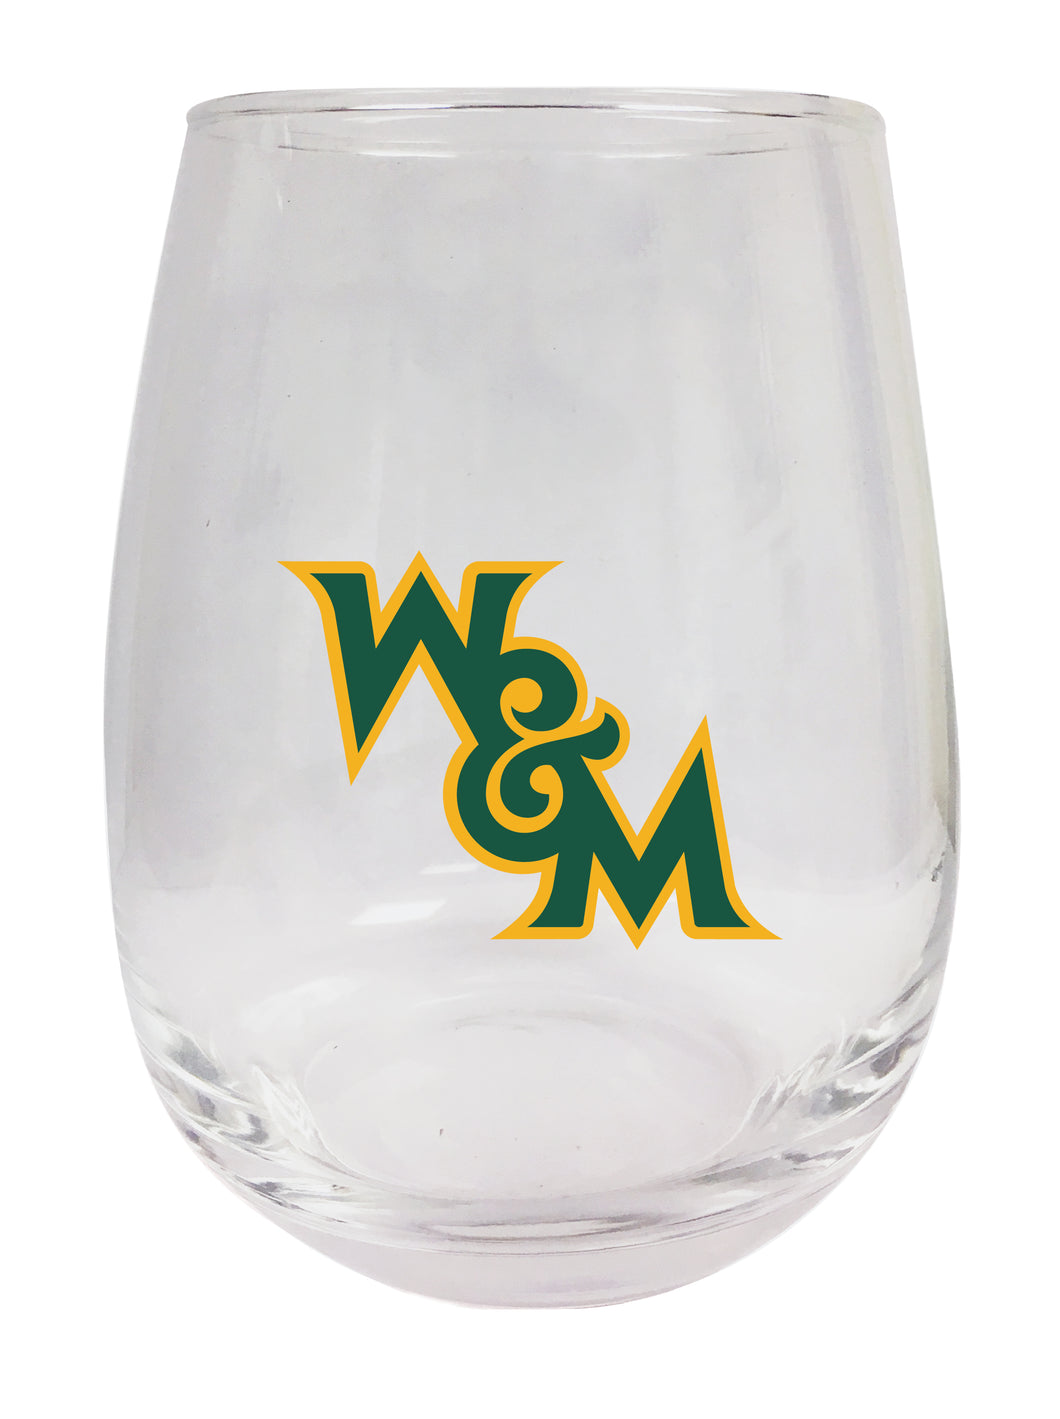 William and Mary Stemless Wine Glass - 9 oz. | Officially Licensed NCAA Merchandise